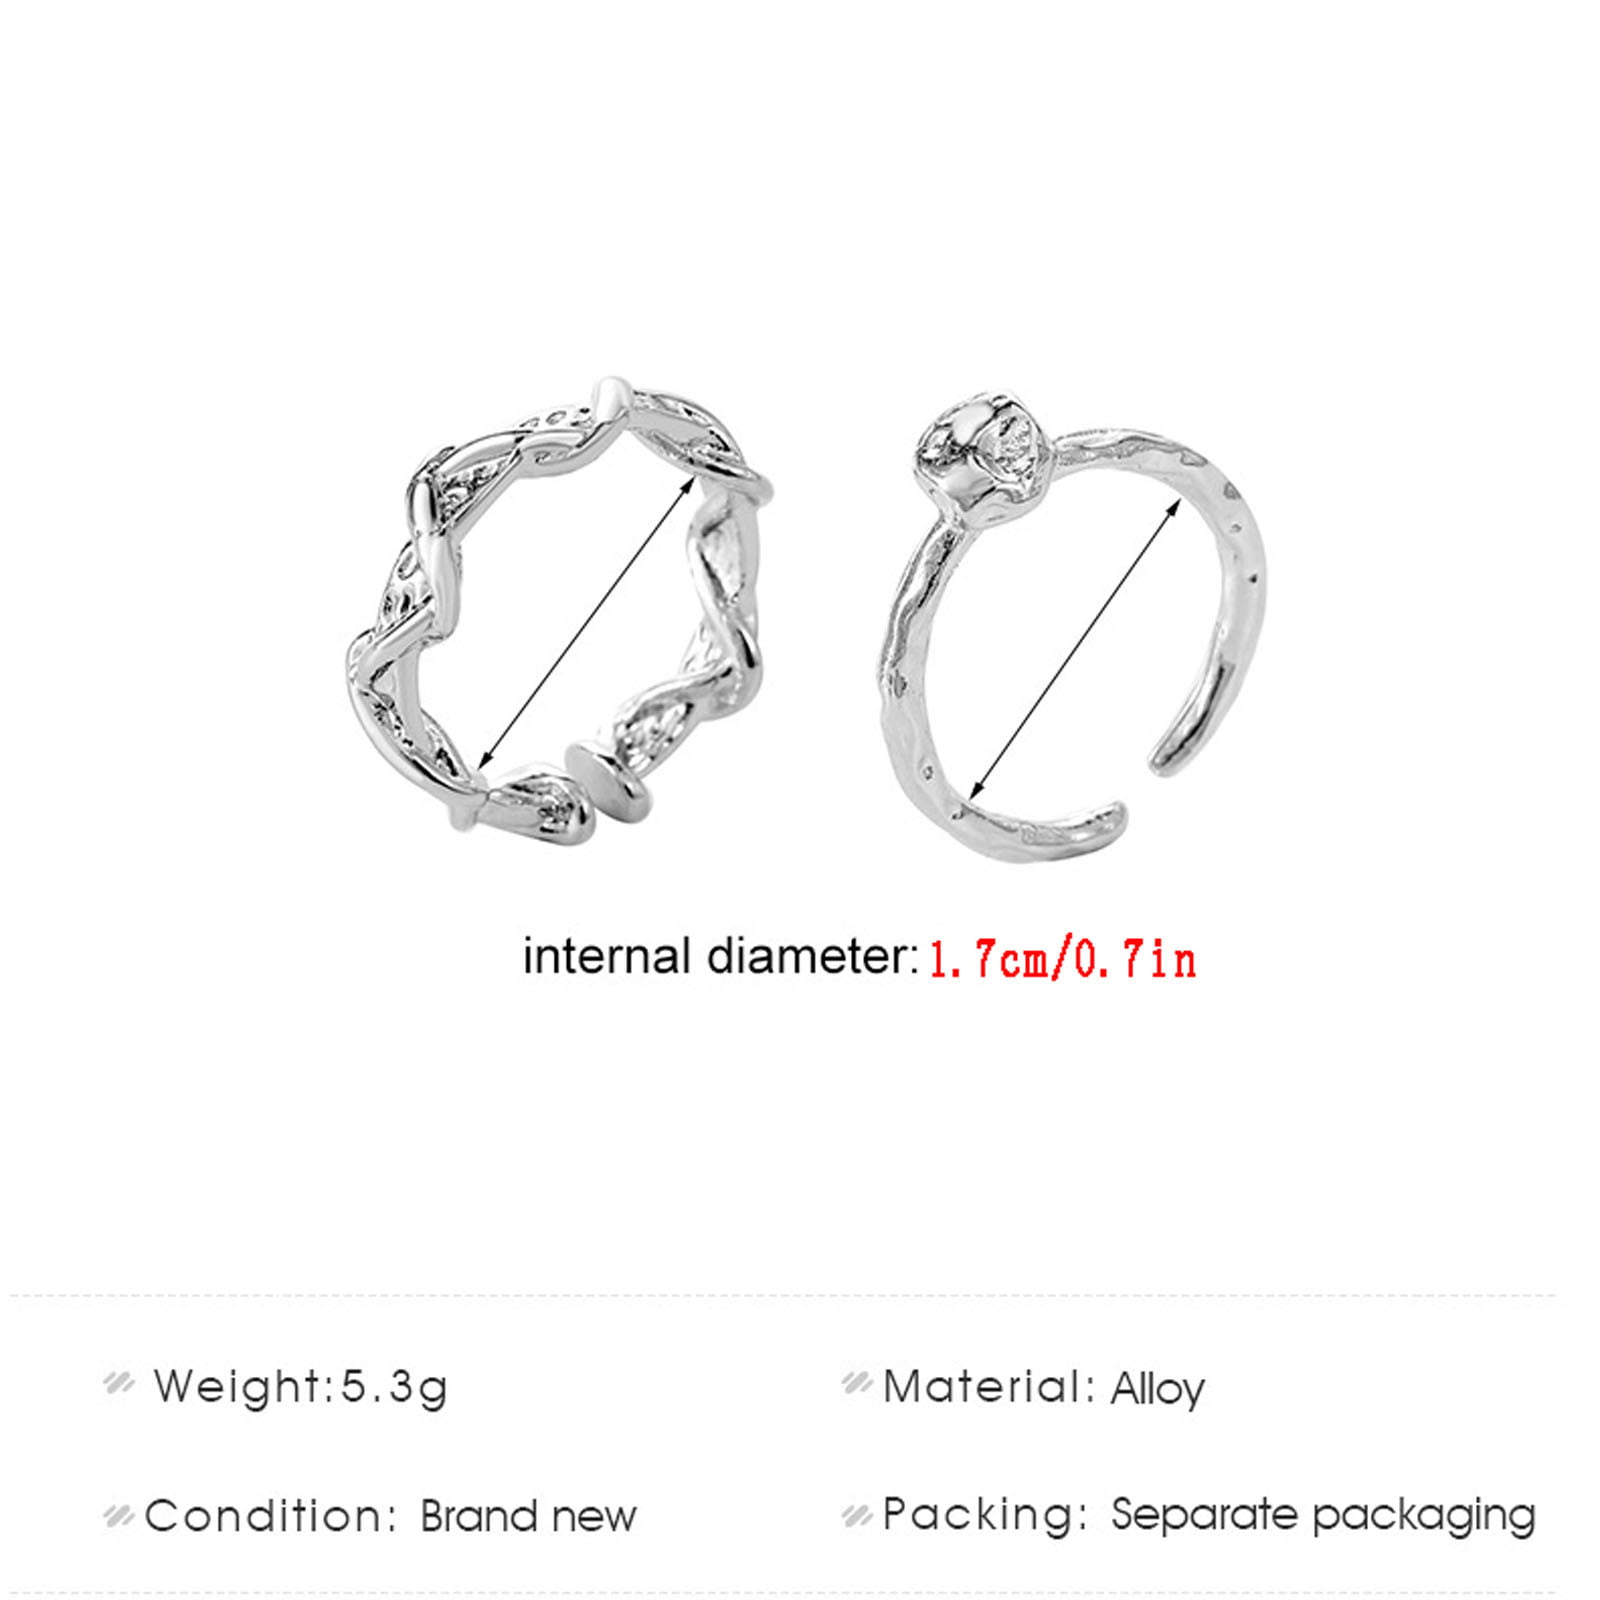 Apmemiss Wholesale Irregular Personality Finger Ring Index And Versatile Two-piece Fashionable Ring Jewelry